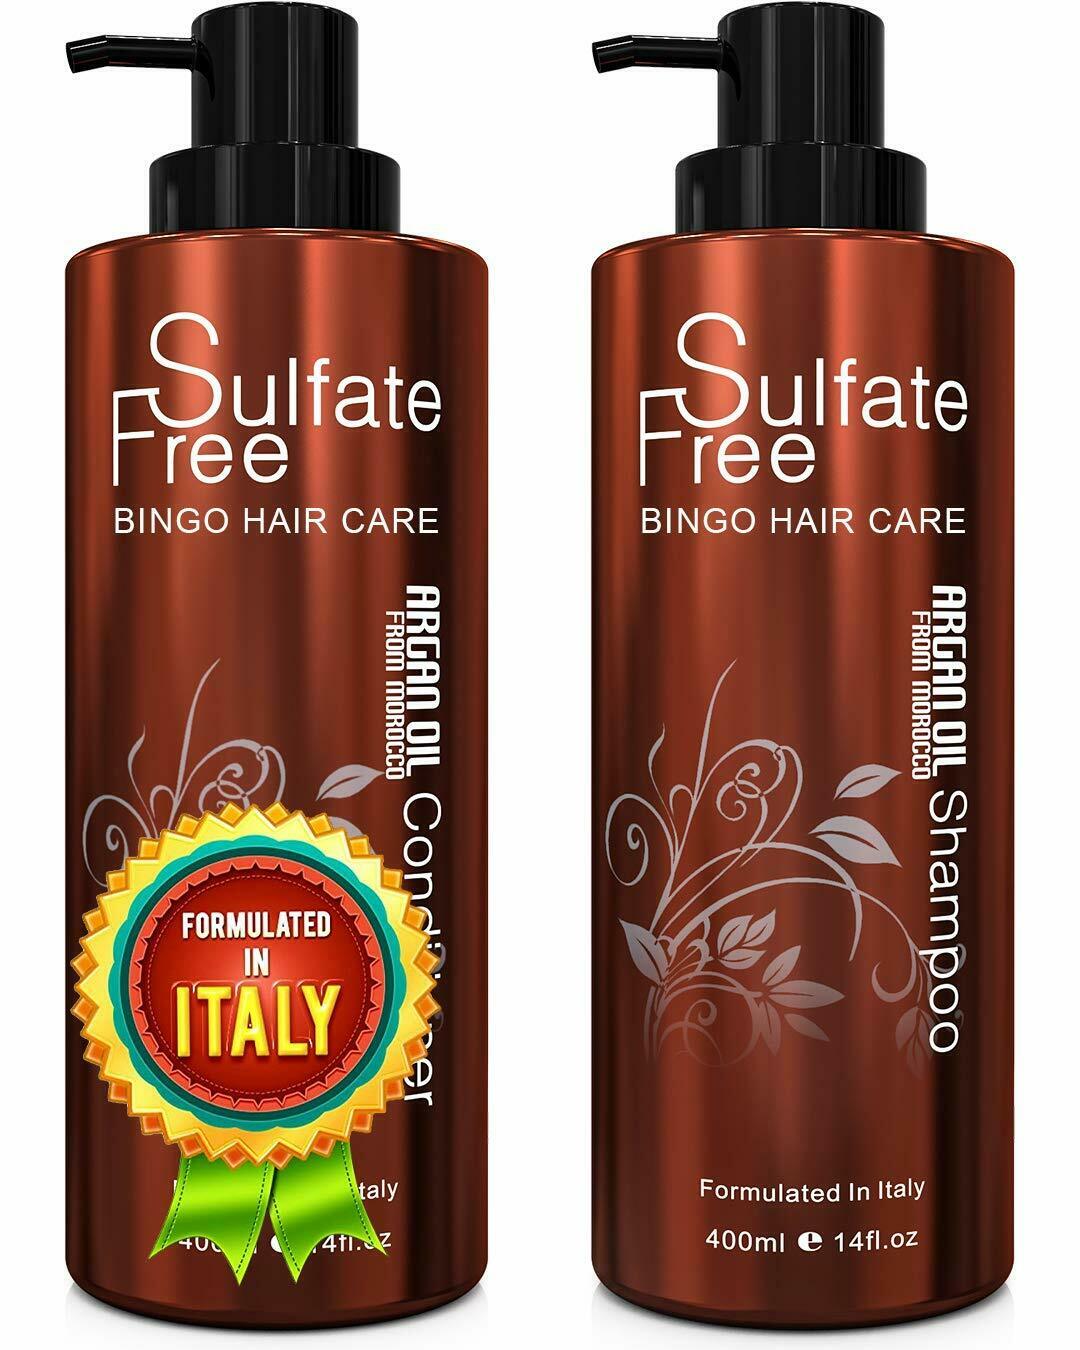 Moroccan Argan Oil Sulfate Free Shampoo and Conditioner Set - Best for Damaged,